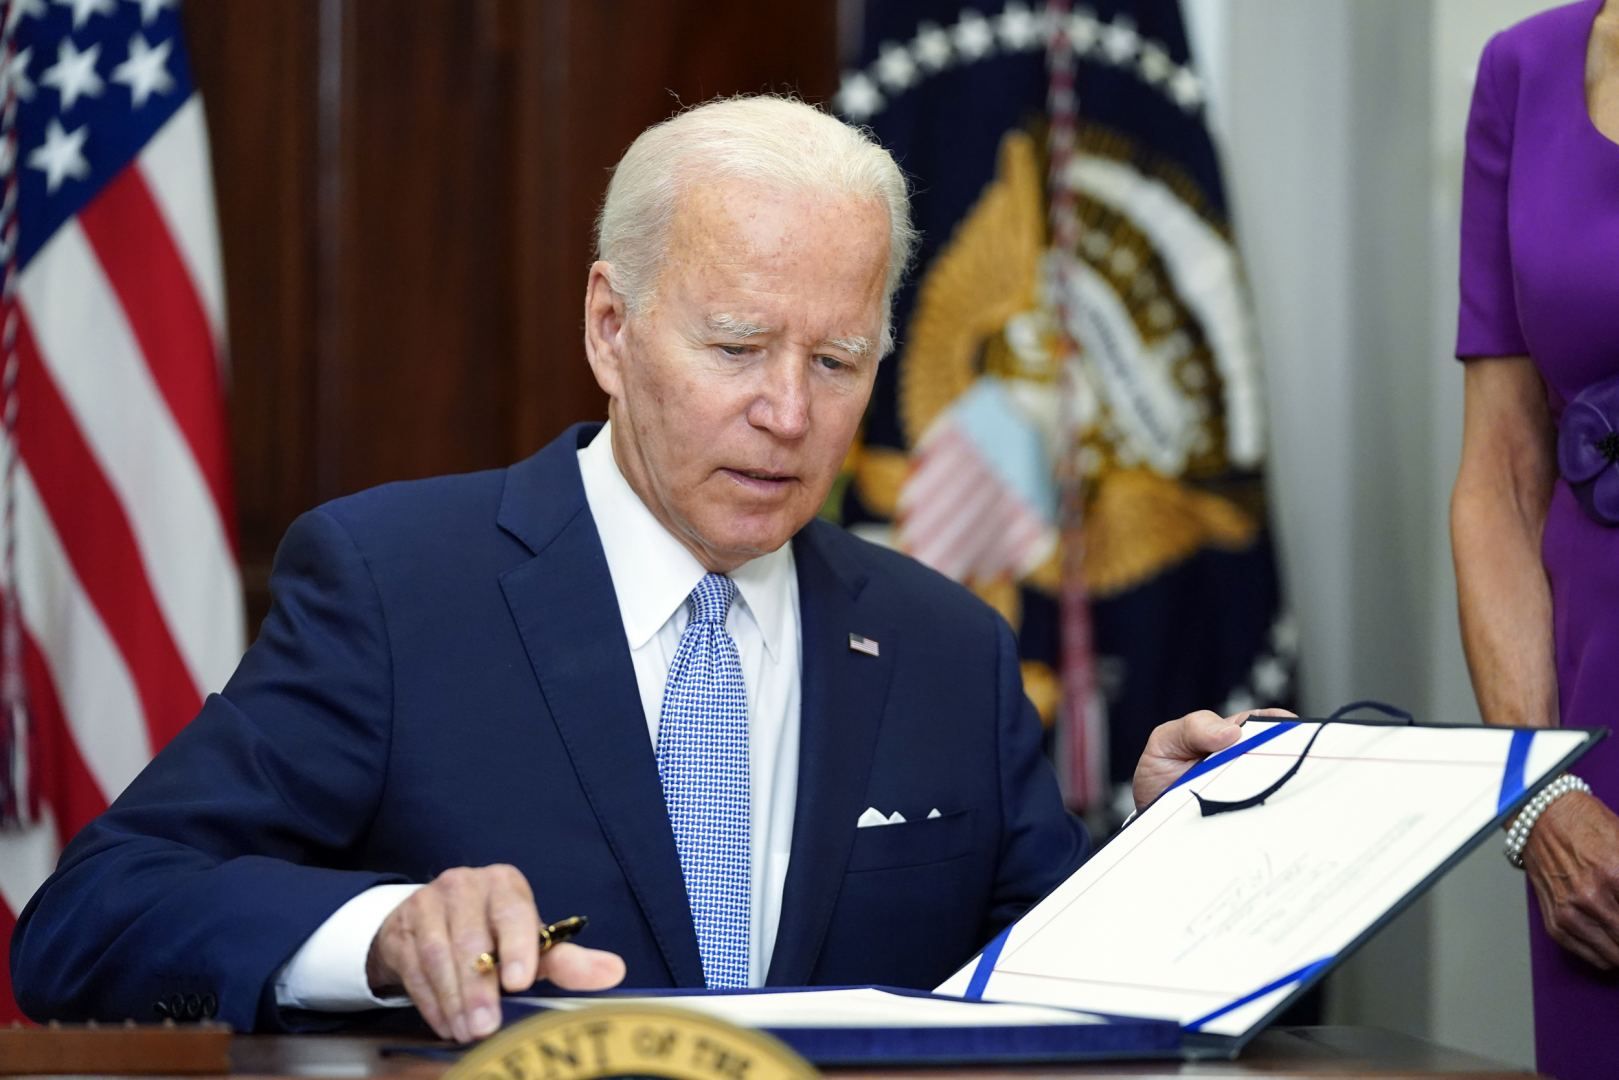 Biden signs protocols on Finland’s and Sweden’s accession to NATO